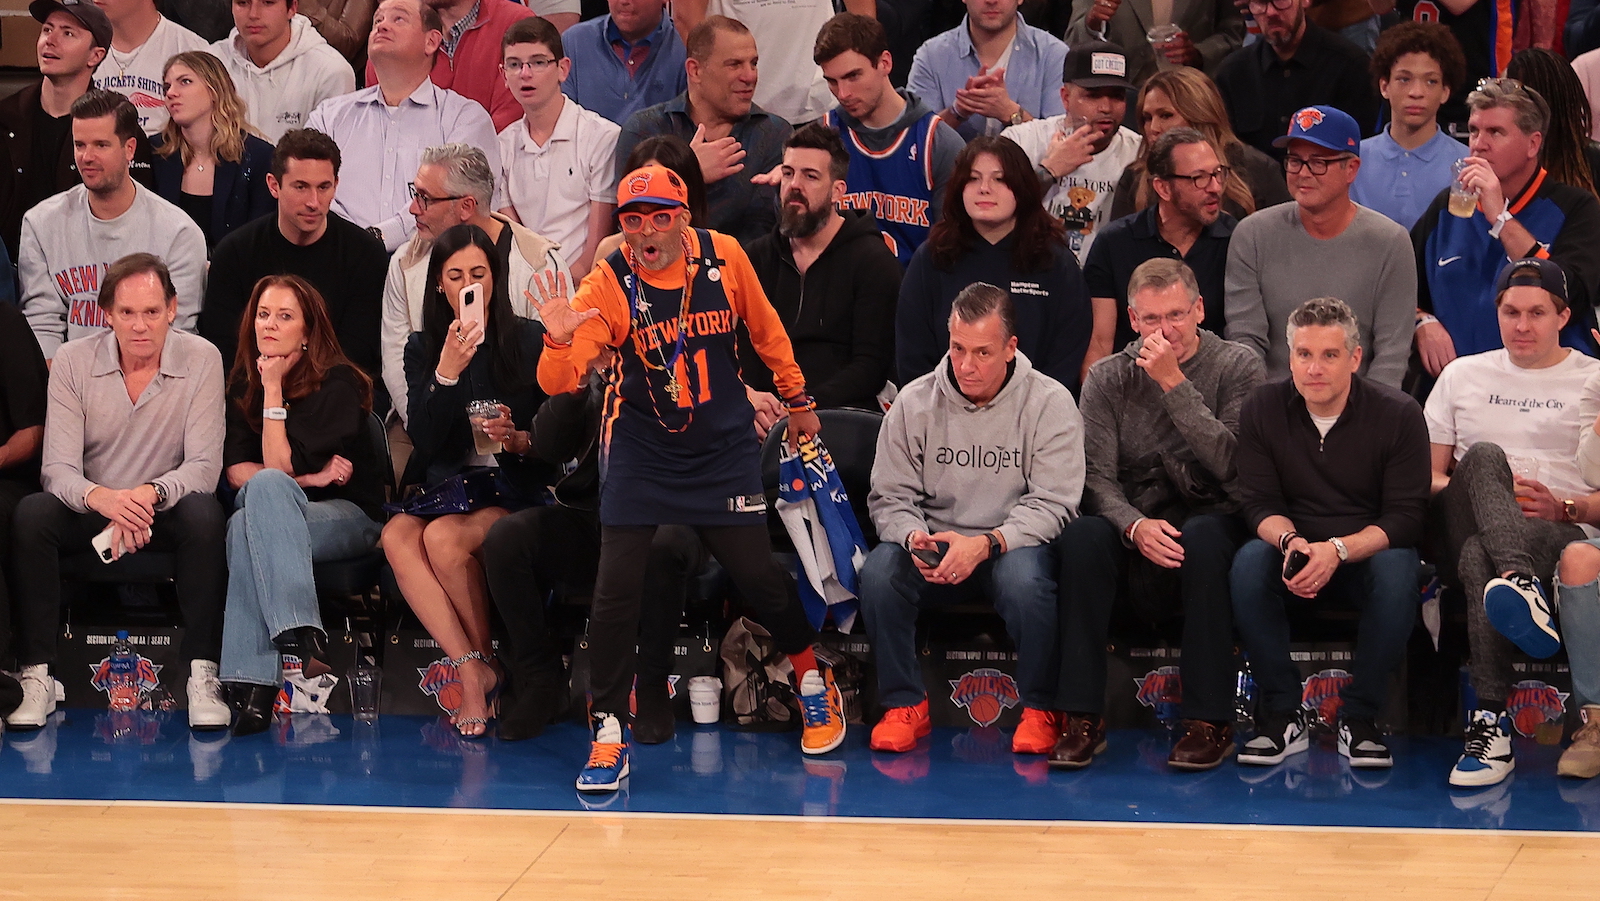 NEW YORK, UNITED STATES - APRIL 21: Fans of the New York Knicks are seen during the game against the Cleveland Cavaliers at Madison Square Garden, New York City, United States. Filmmaker Shelton Jackson "Spike" Lee watches the game with a Knicks jersey at Madison Square Garden.